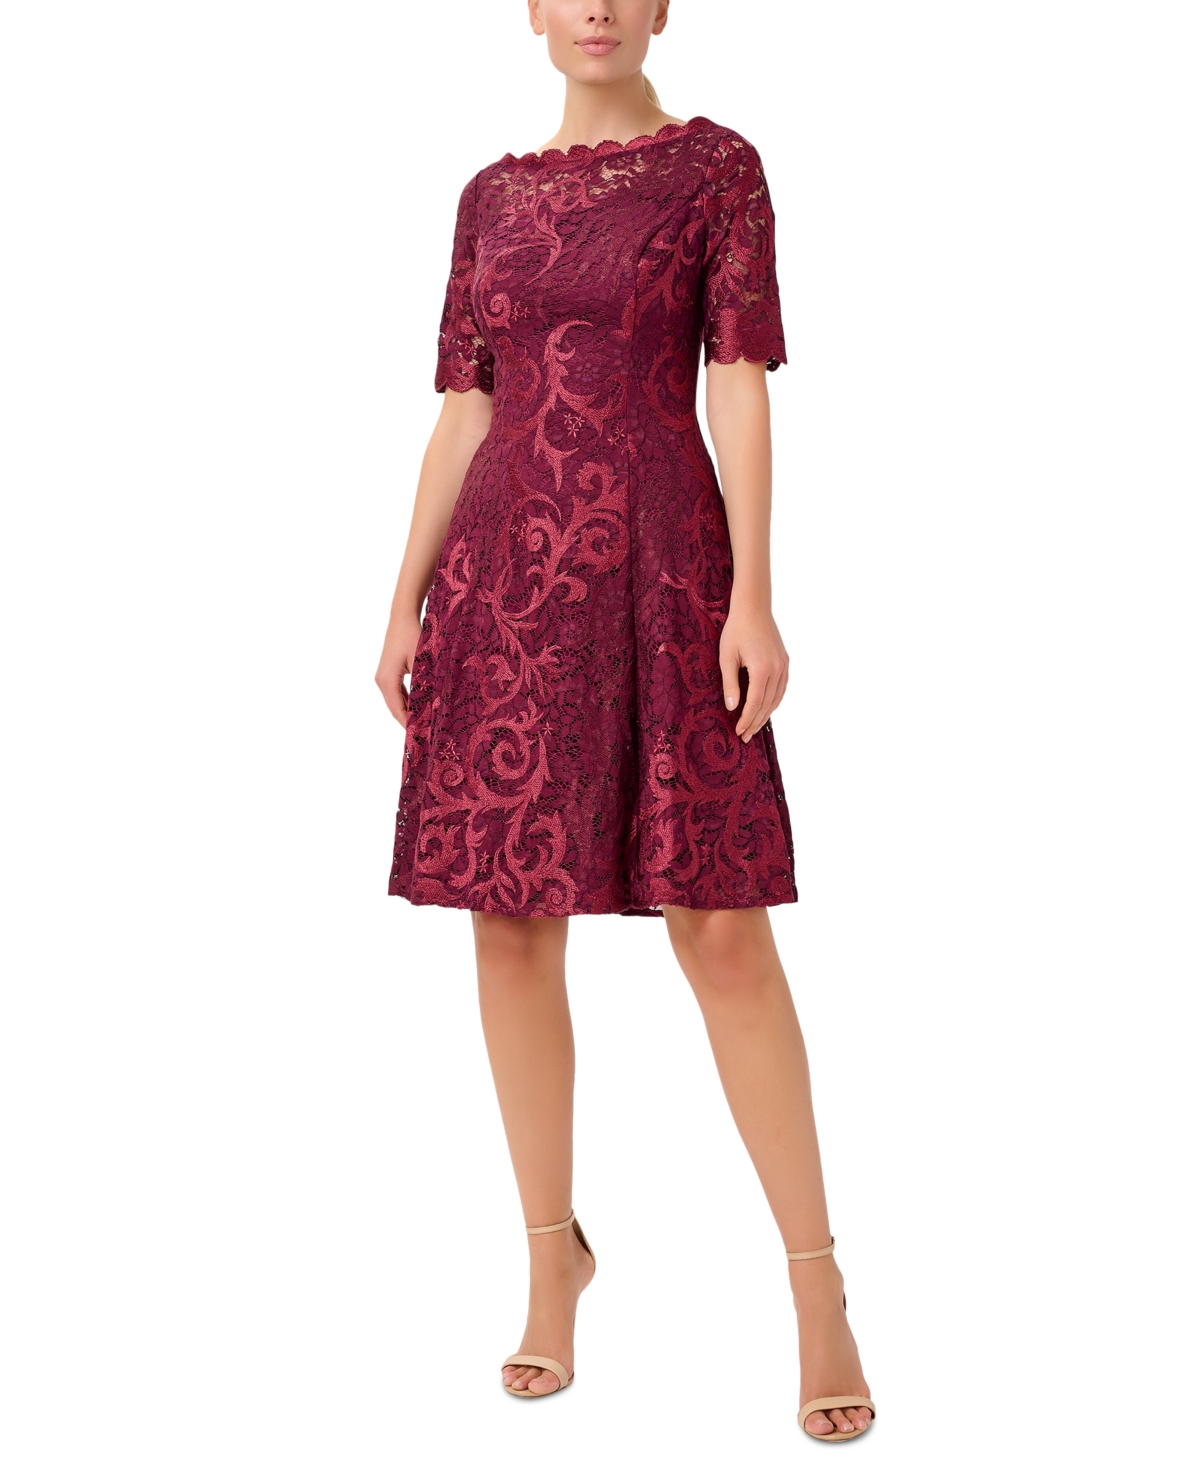 ADRIANNA PAPELL LACE FIT & FLARE DRESS